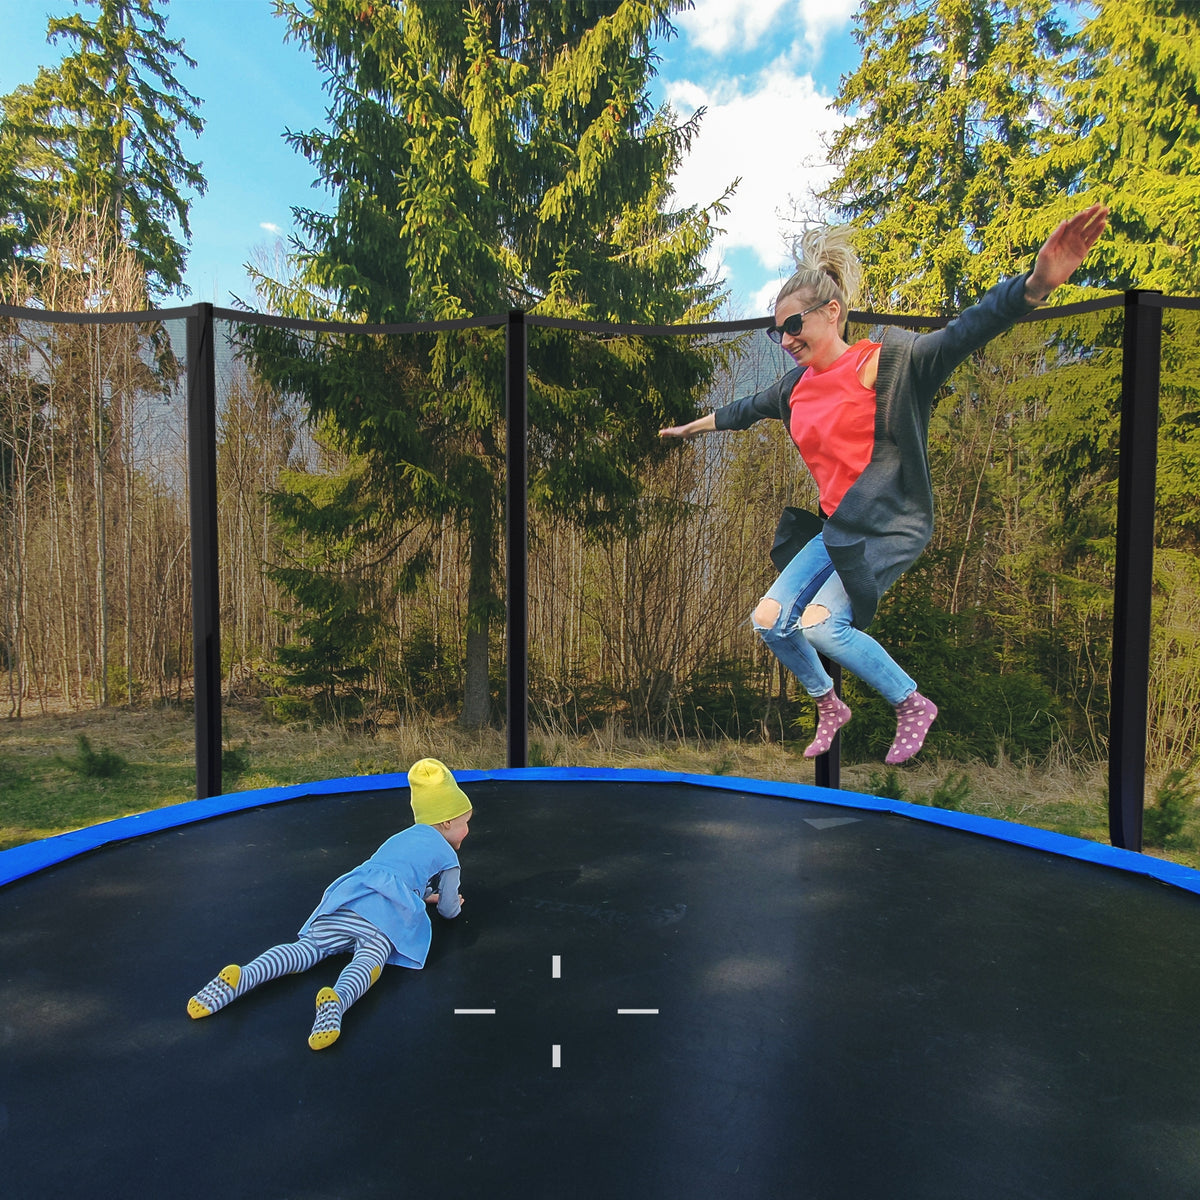 8/10/12/14/15/16 Feet Outdoor Trampoline Bounce Combo with Safety Closure Net Ladder